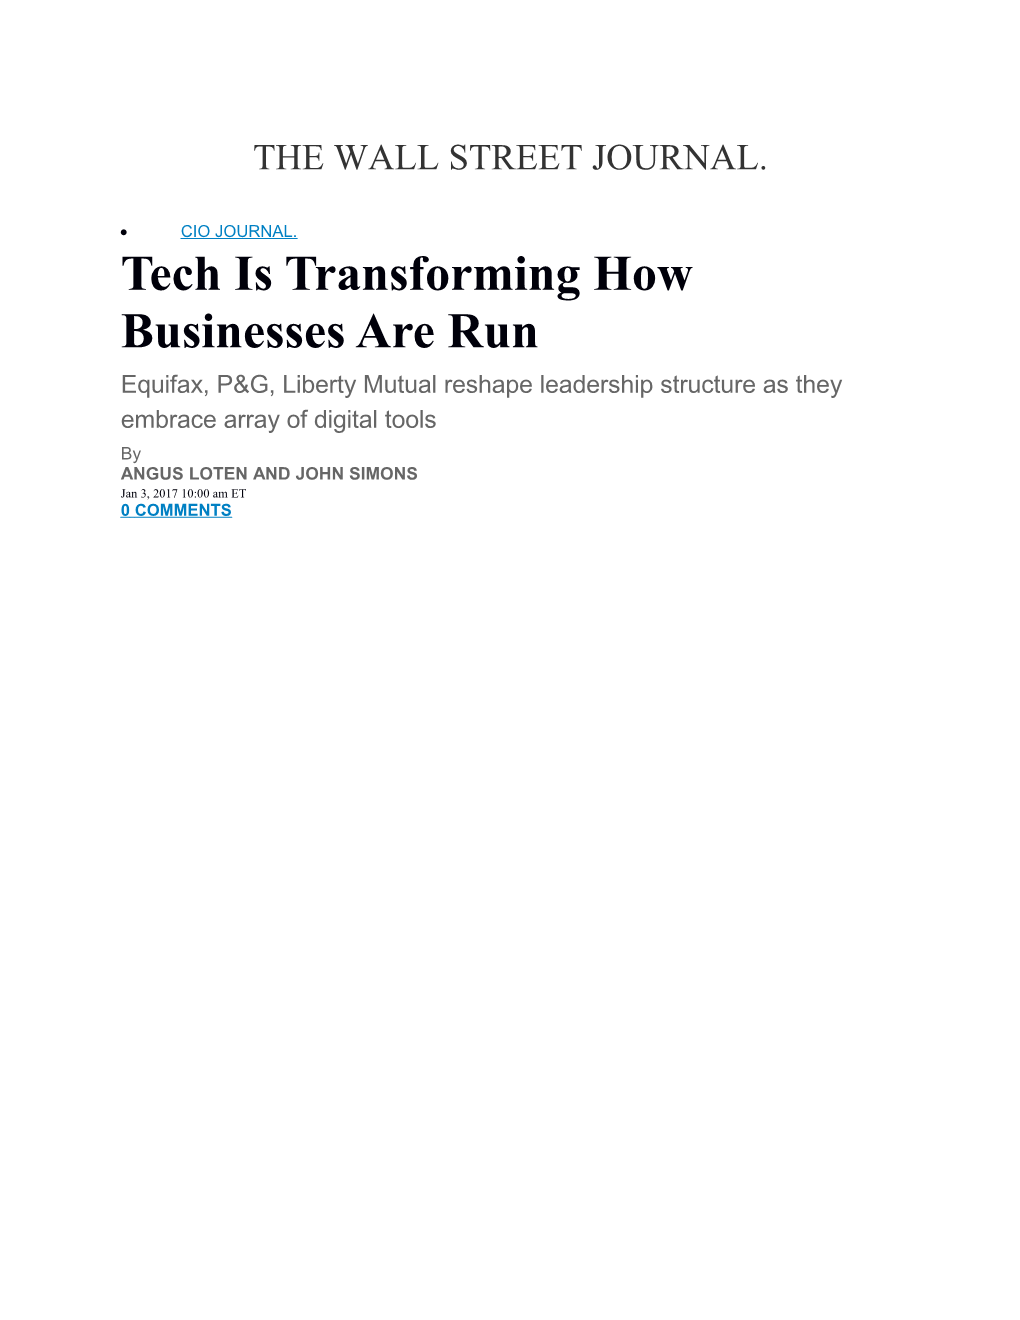 Tech Is Transforming How Businesses Are Run